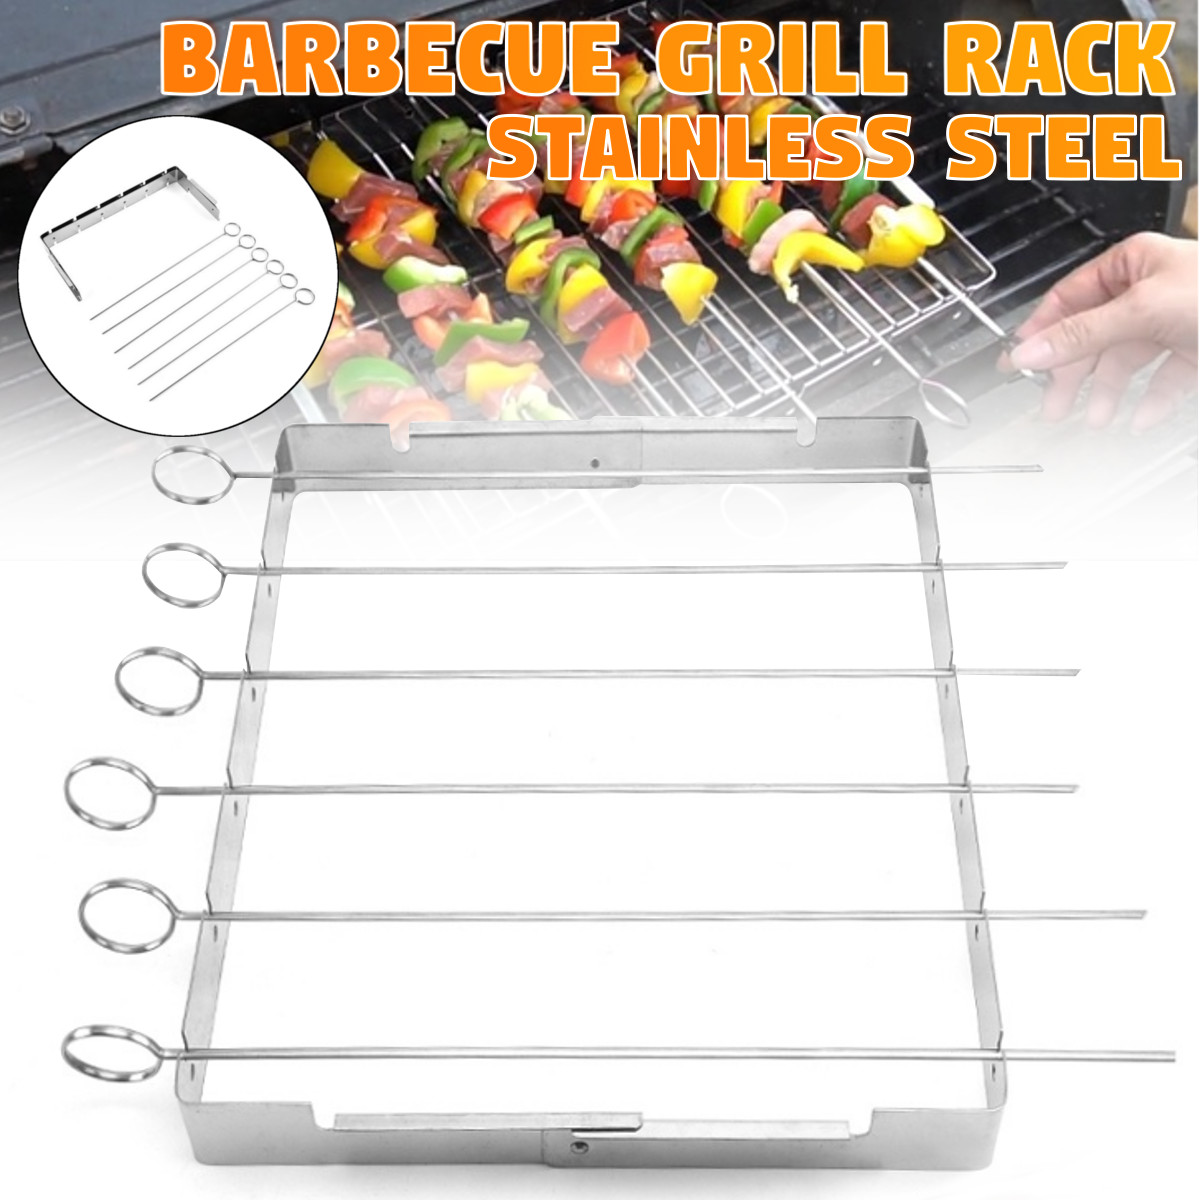 Portable-Barbecue-BBQ-Rack-Stainless-Steel-Skewer-Meat-Foods-Grill-Camping-Tool-1753748-1